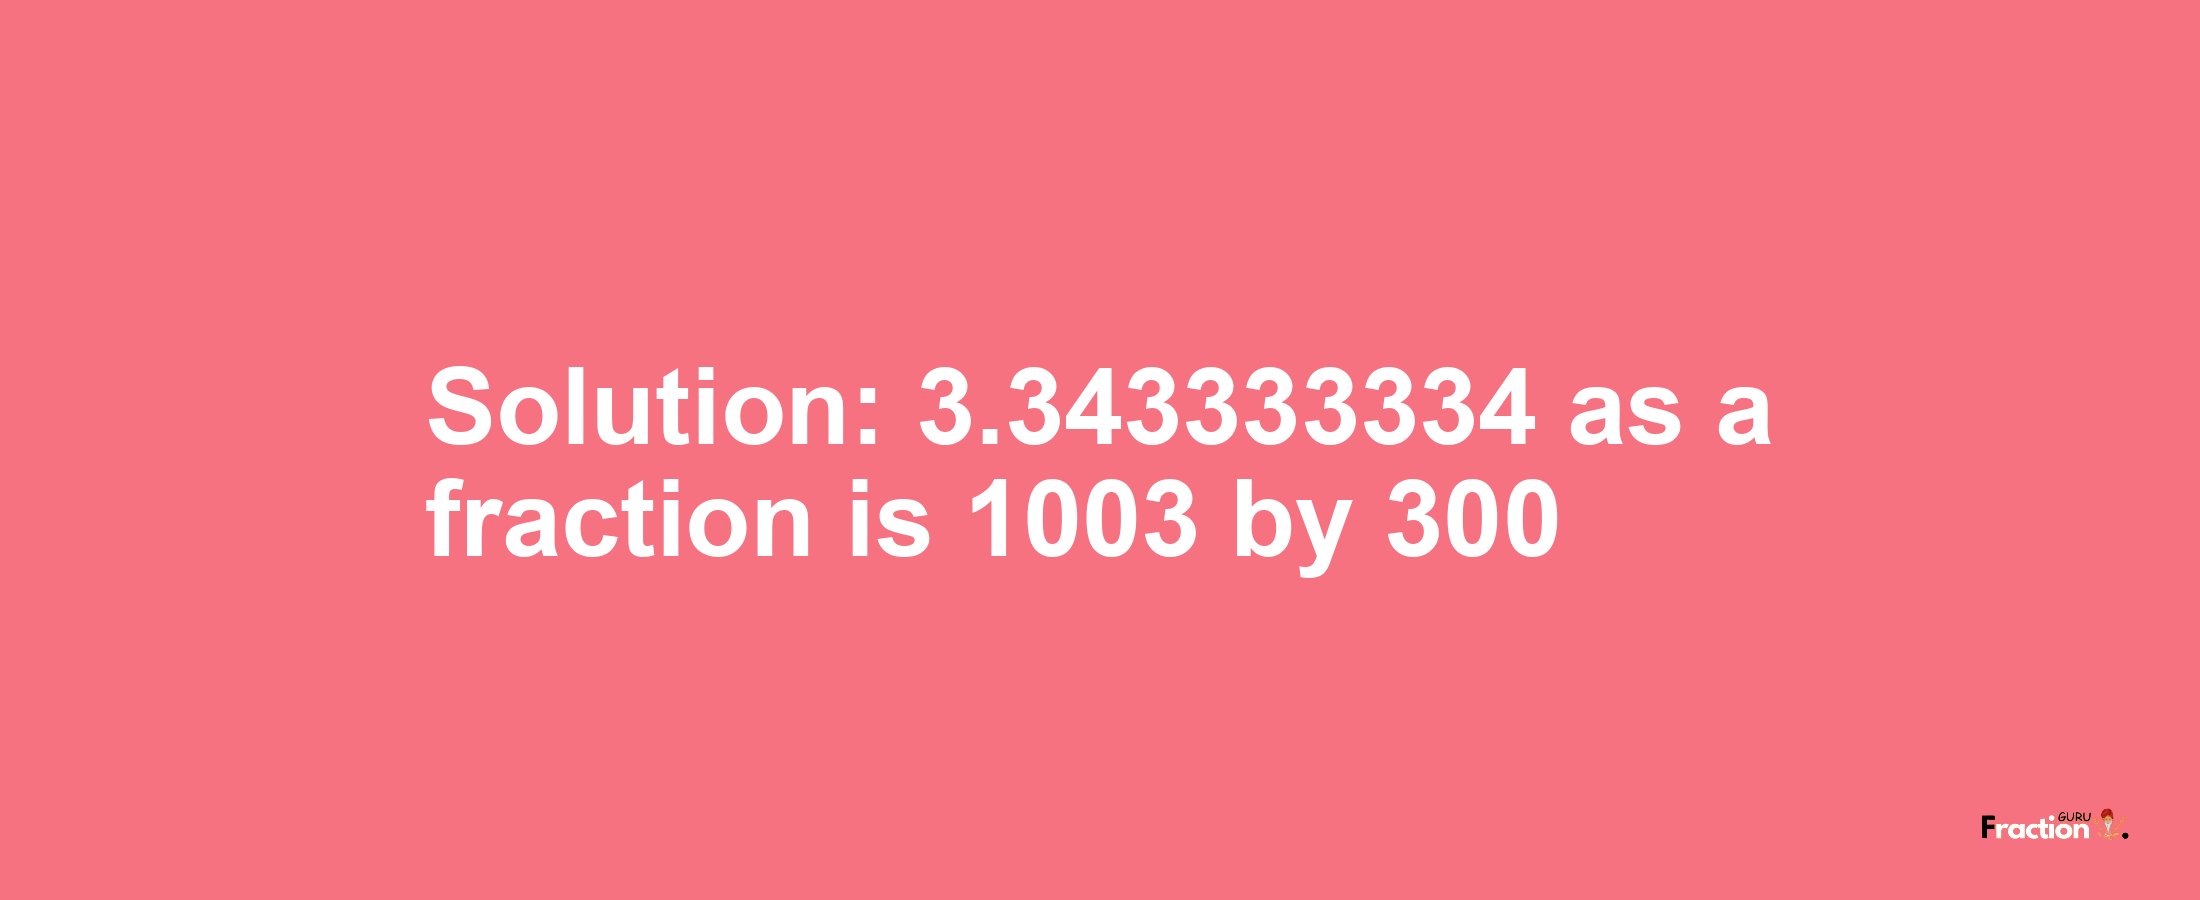 Solution:3.343333334 as a fraction is 1003/300